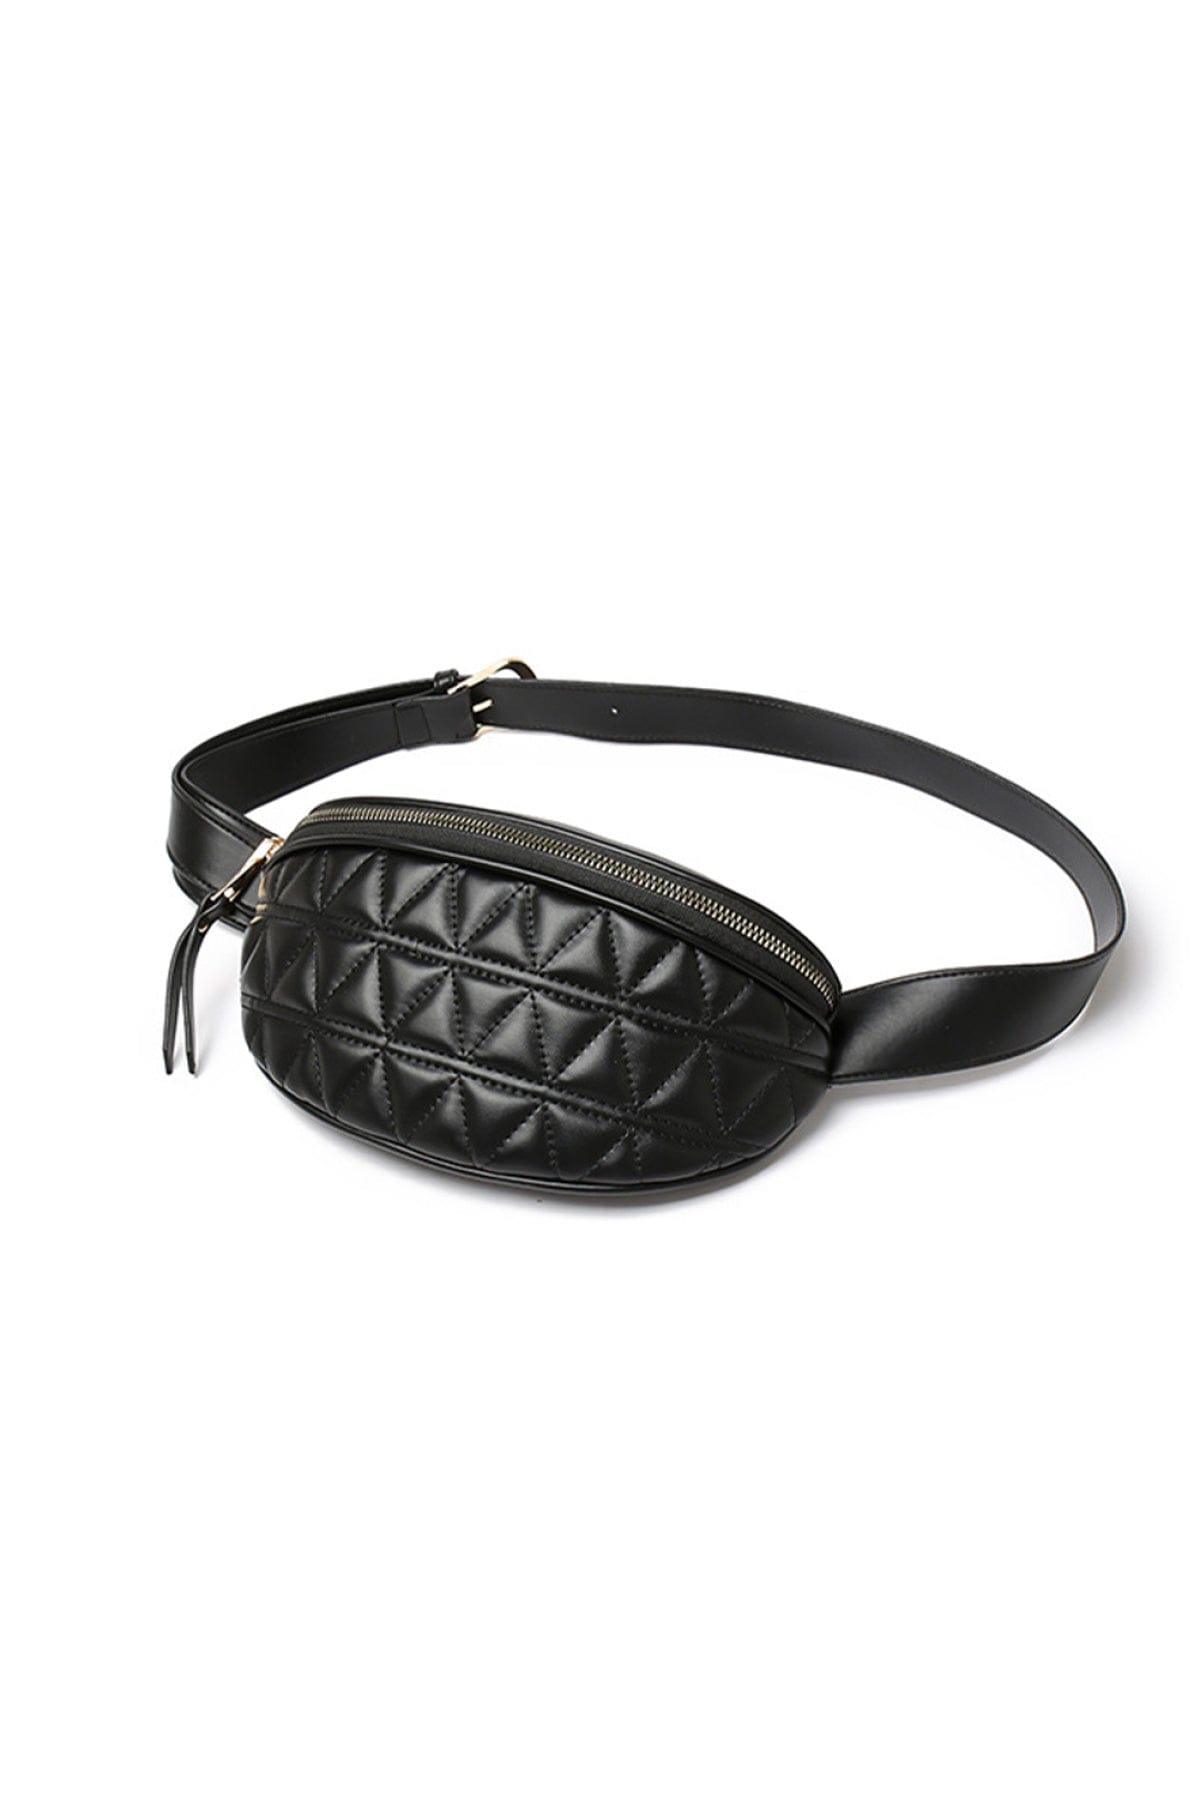 PU Leather Quilted Zipper Chest Bag Black